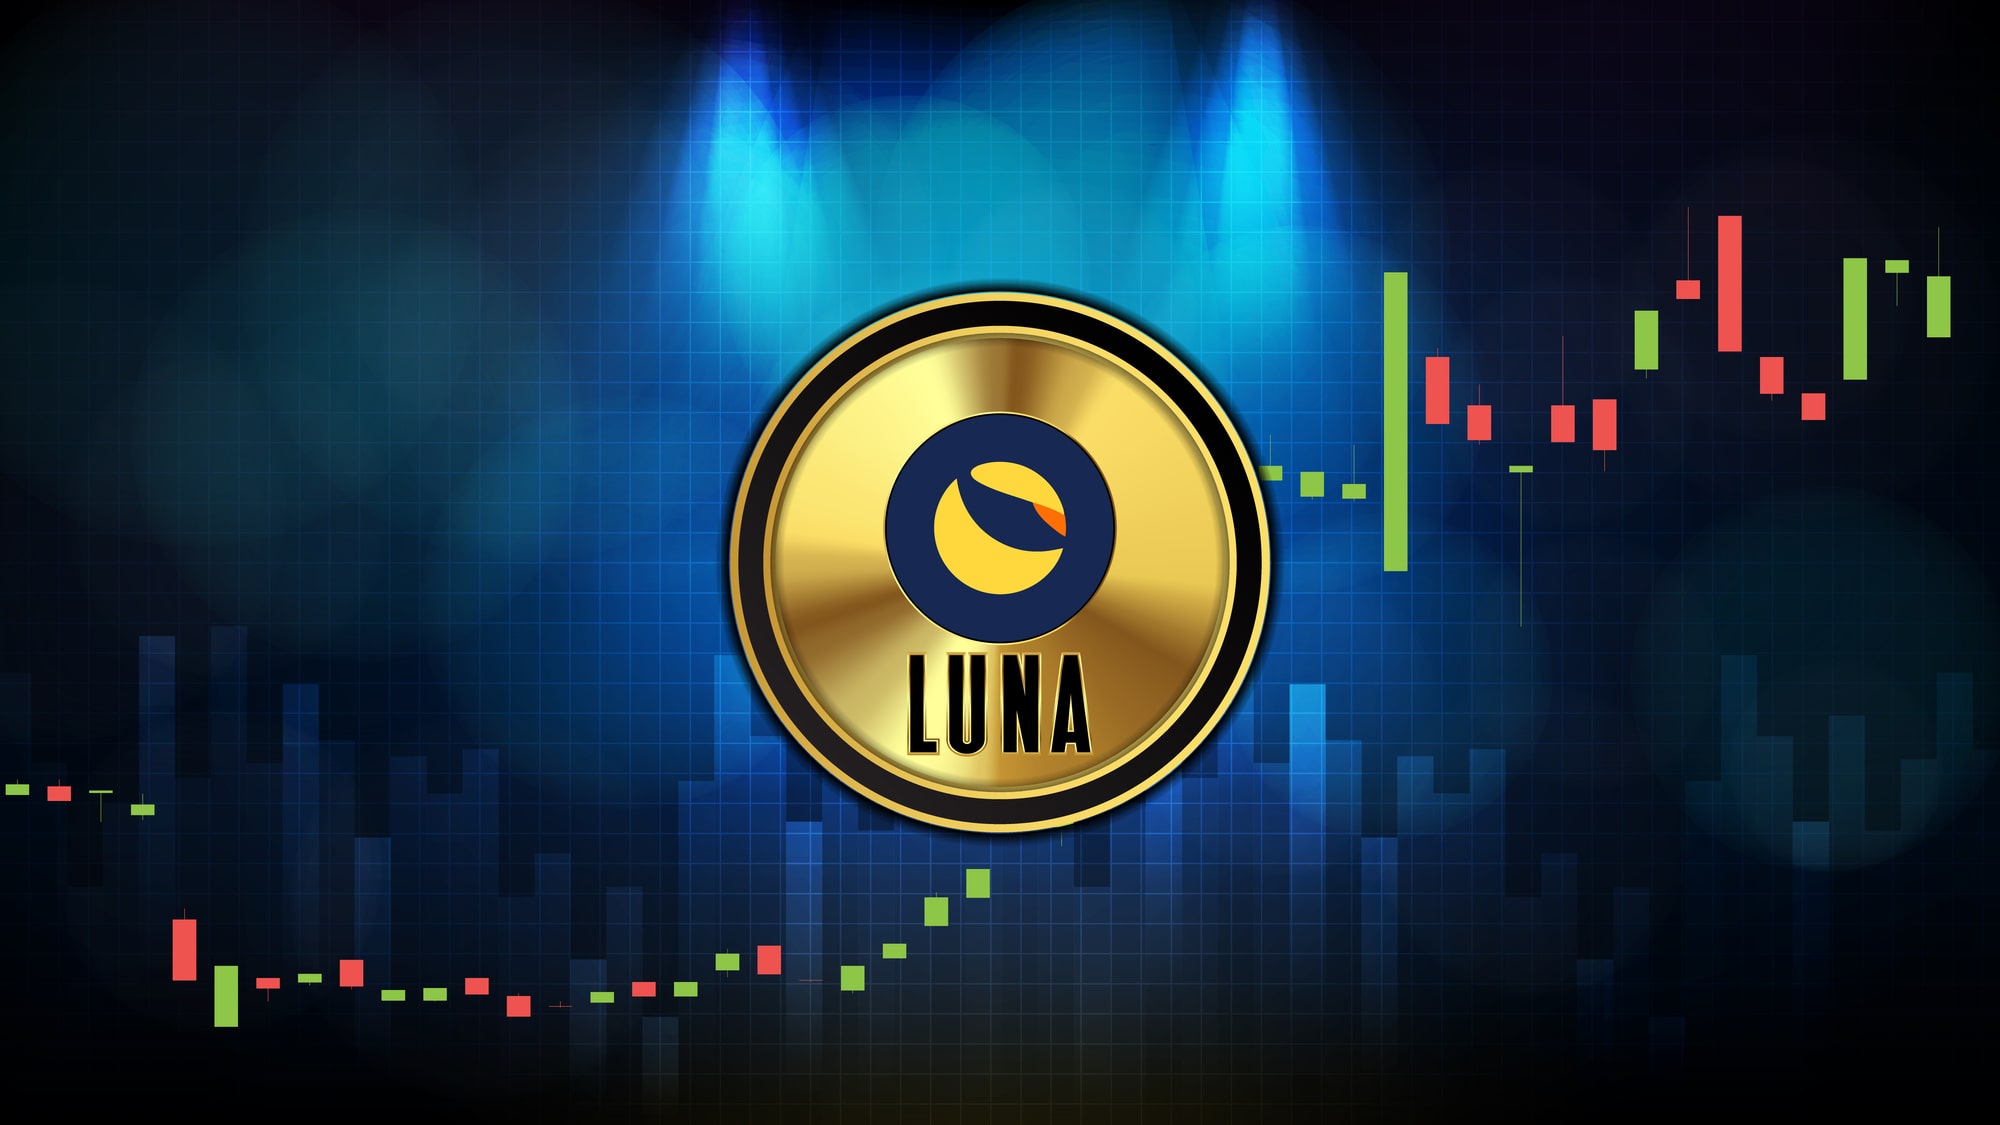 Terra’s LUNA surges 80% in a week, overtaking Shiba Inu and Dogecoin